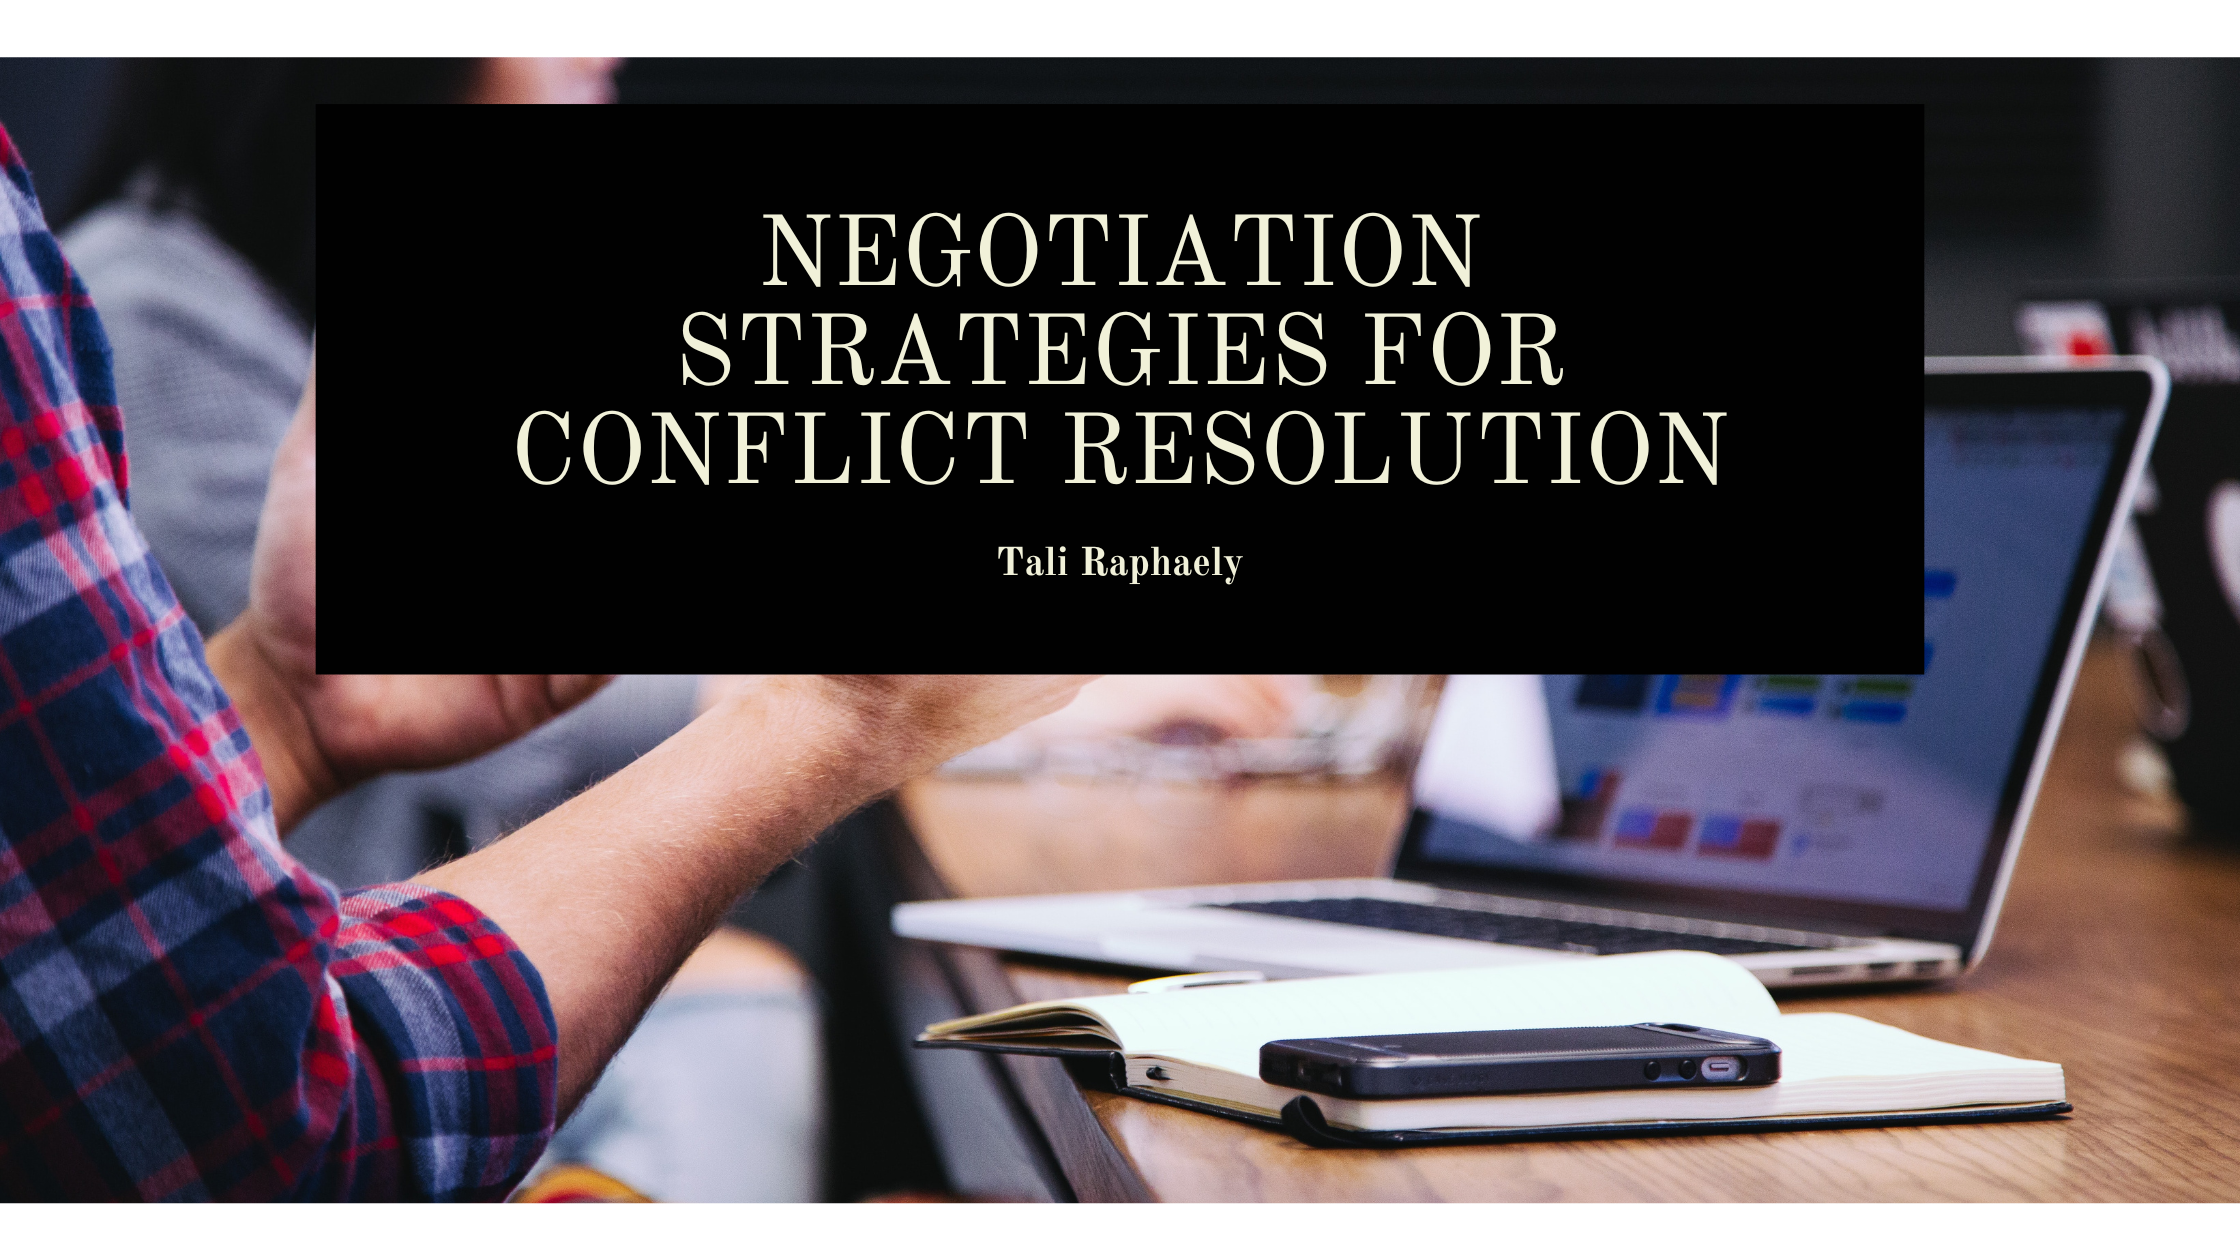 EE EE EE

NEGOTIATION
STRATEGIES FOR
CONFLICT RESOLUTION

Tali Raphaely